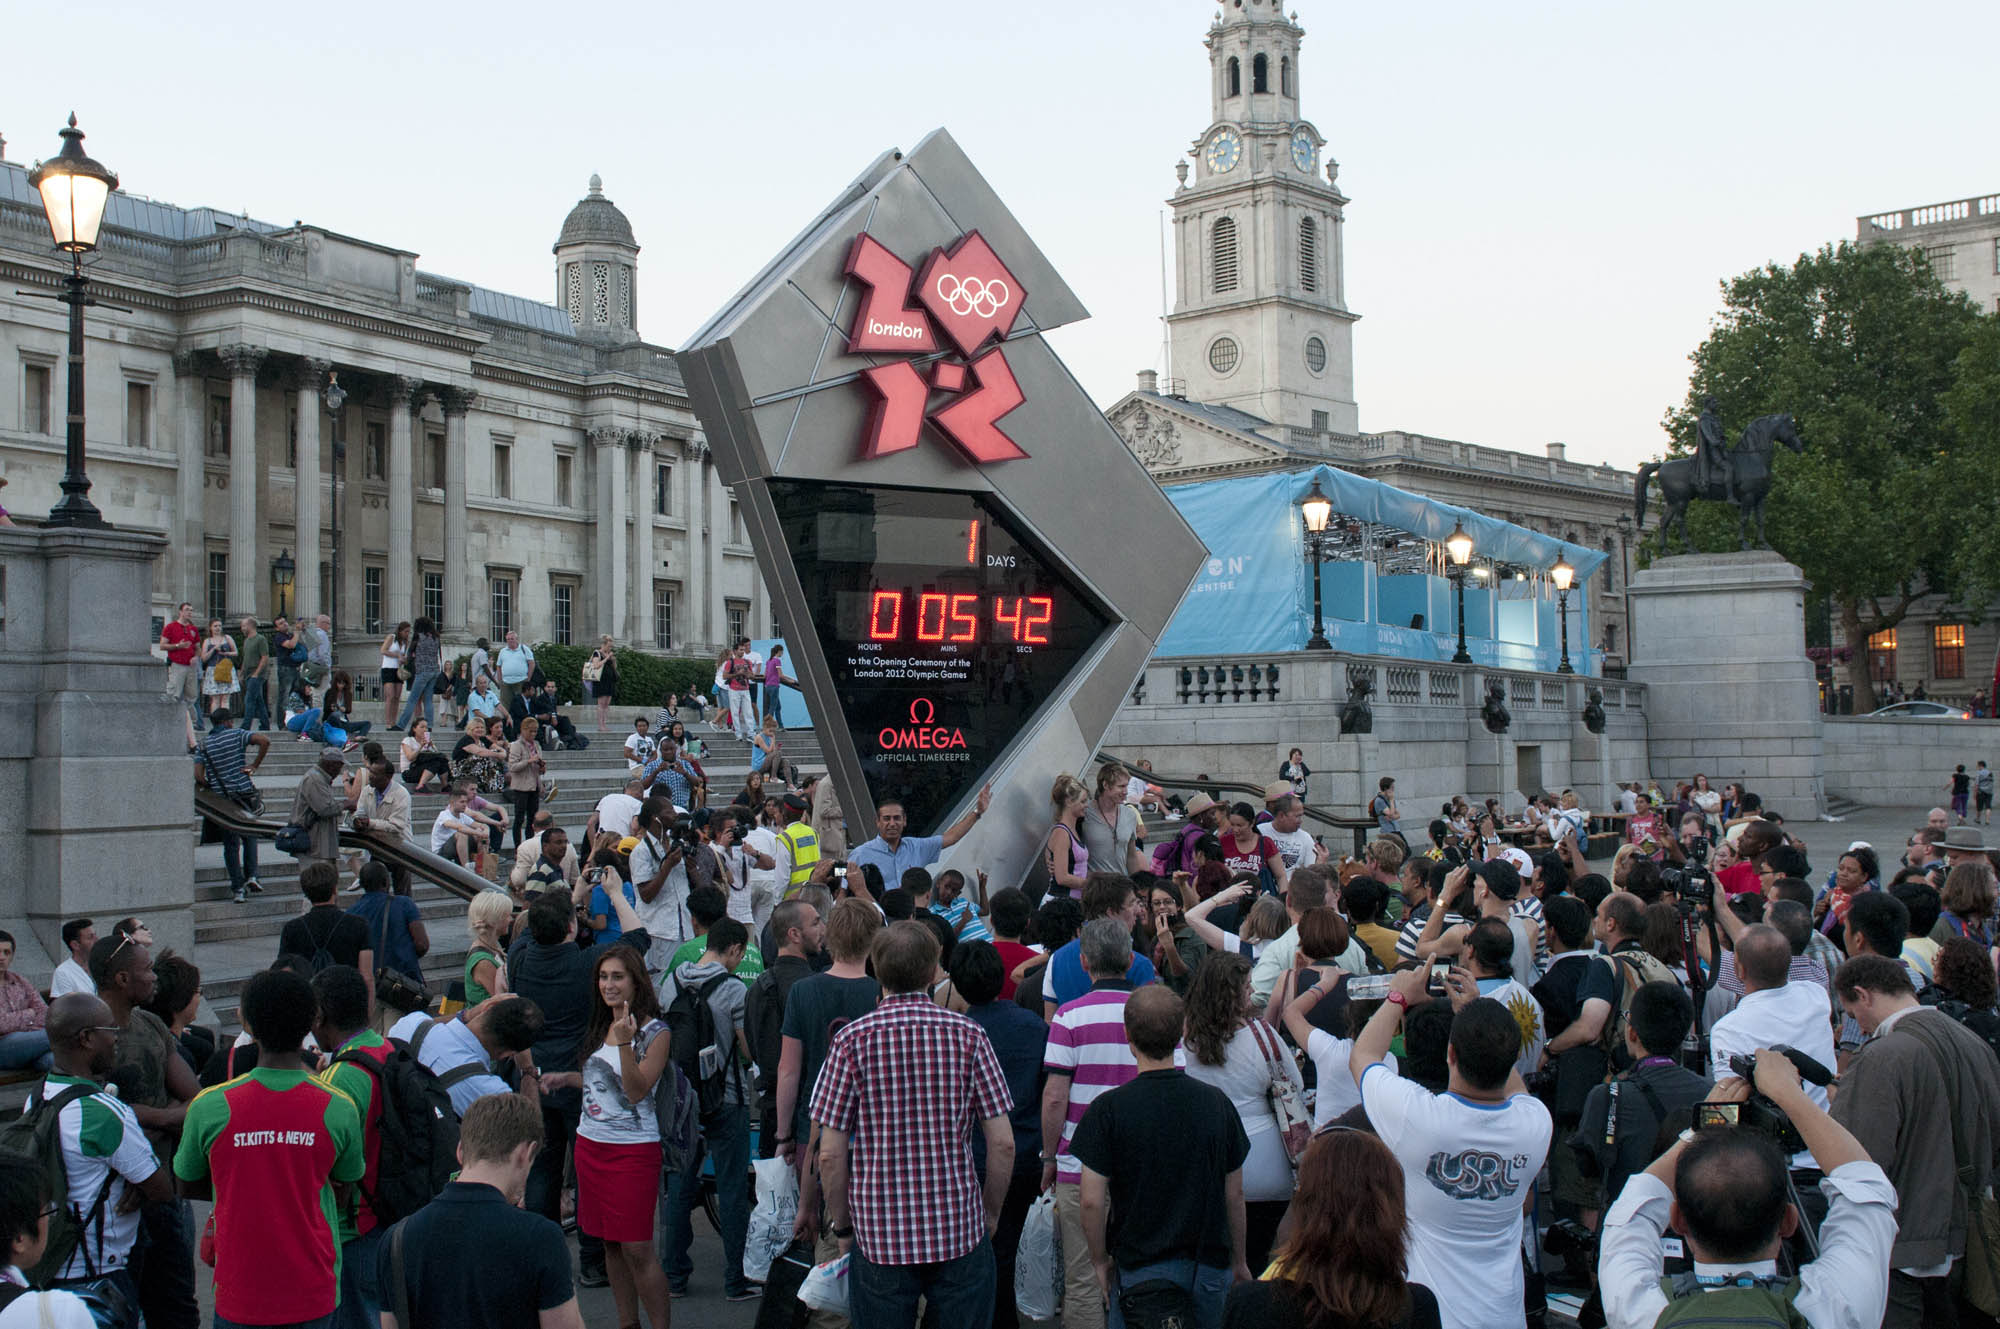 London residents and tourists gather around the Olympic Countdown Clock in London's Trafalgar Square to begin a countdown to 24 hours until the opening ceremony of the 2012 summer games.